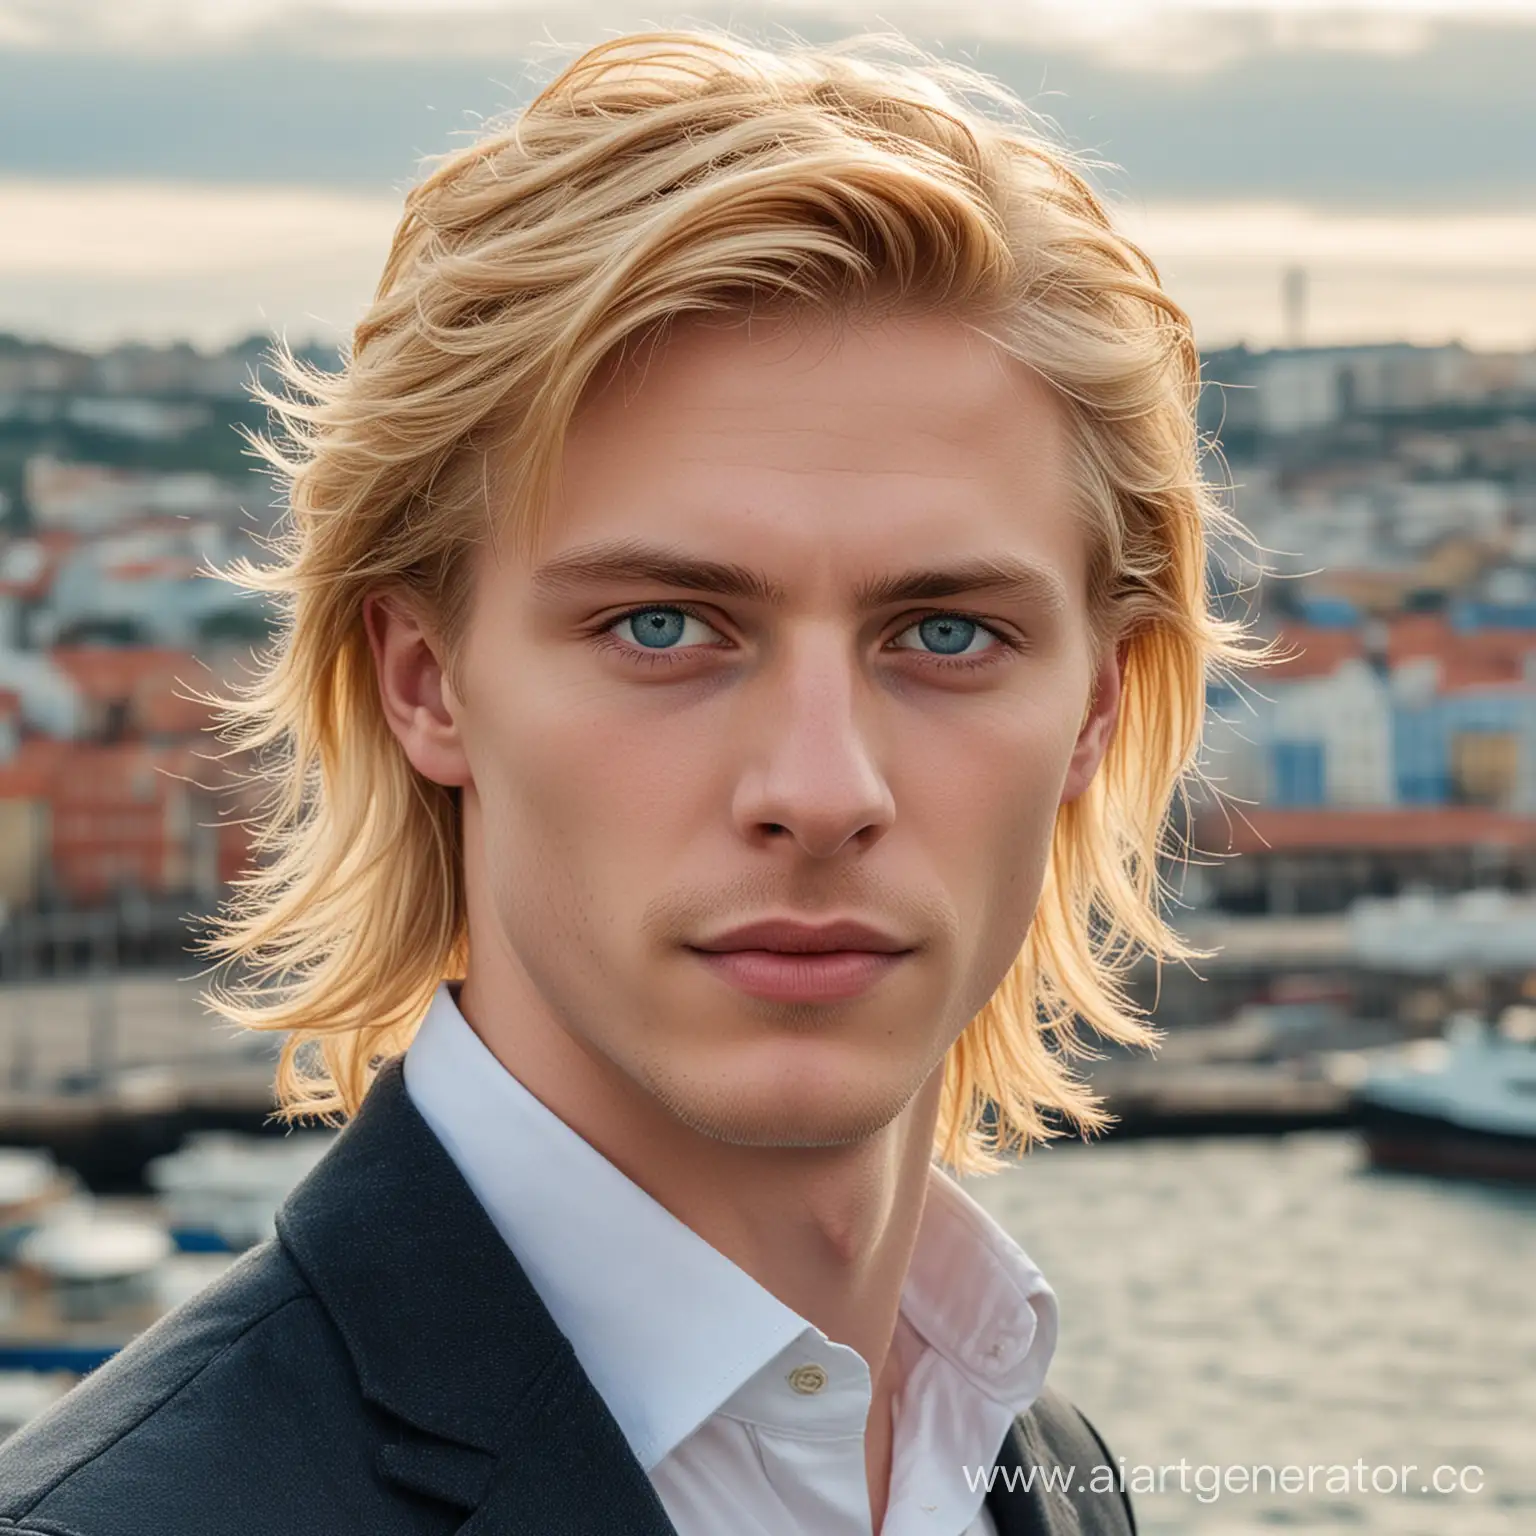 GoldenHaired-Youth-in-Port-City-Ambience